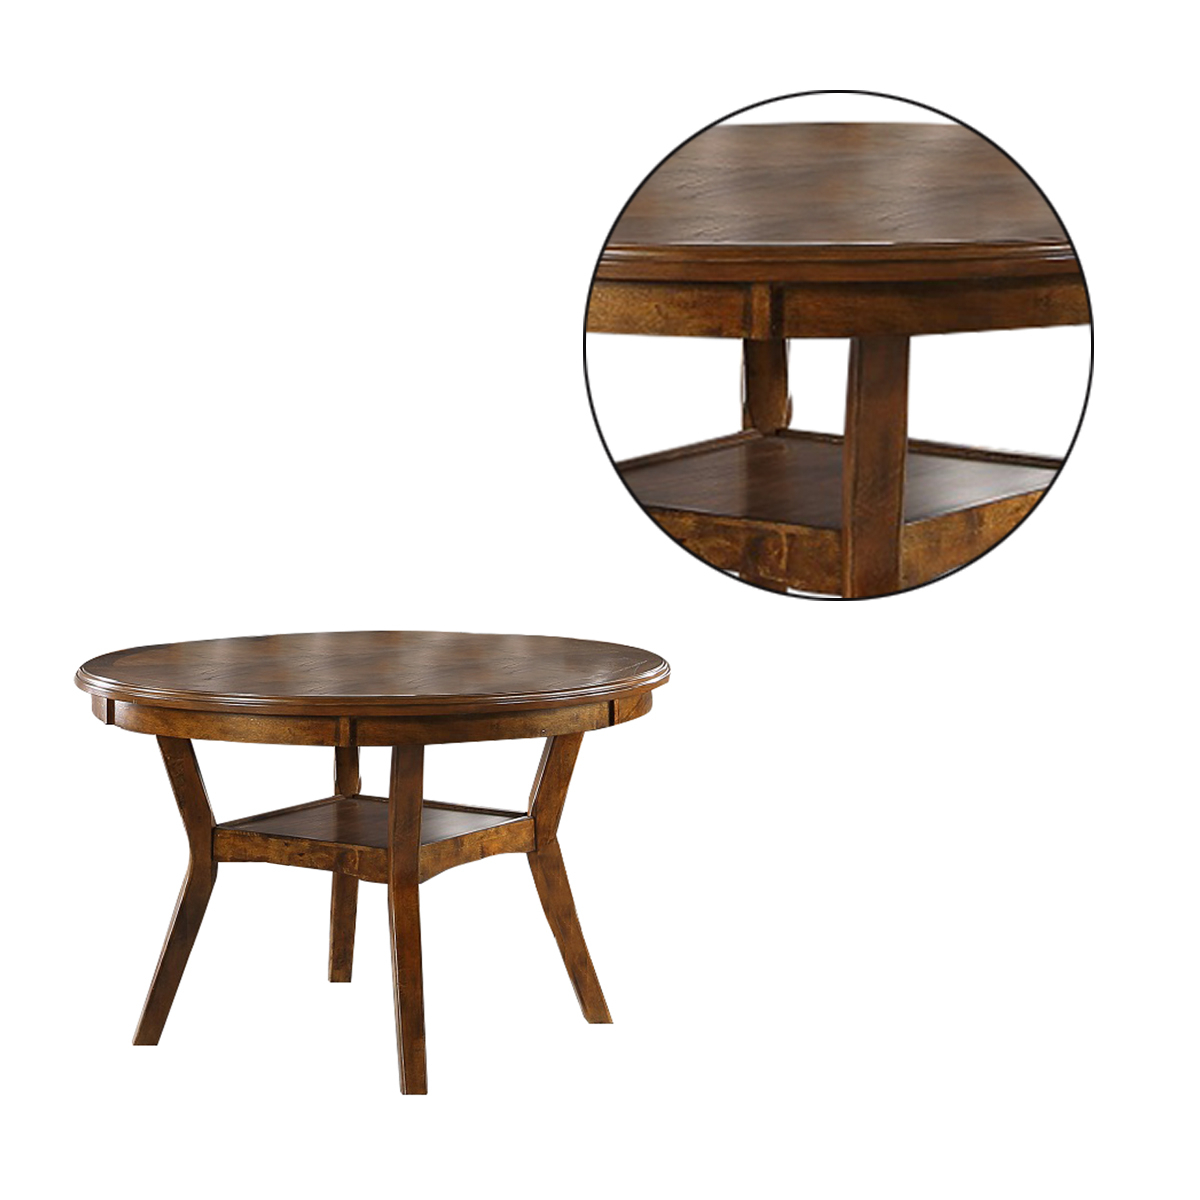 Round Top Wooden Dining Table With Boomerang Legs, Walnut Brown- Saltoro Sherpi